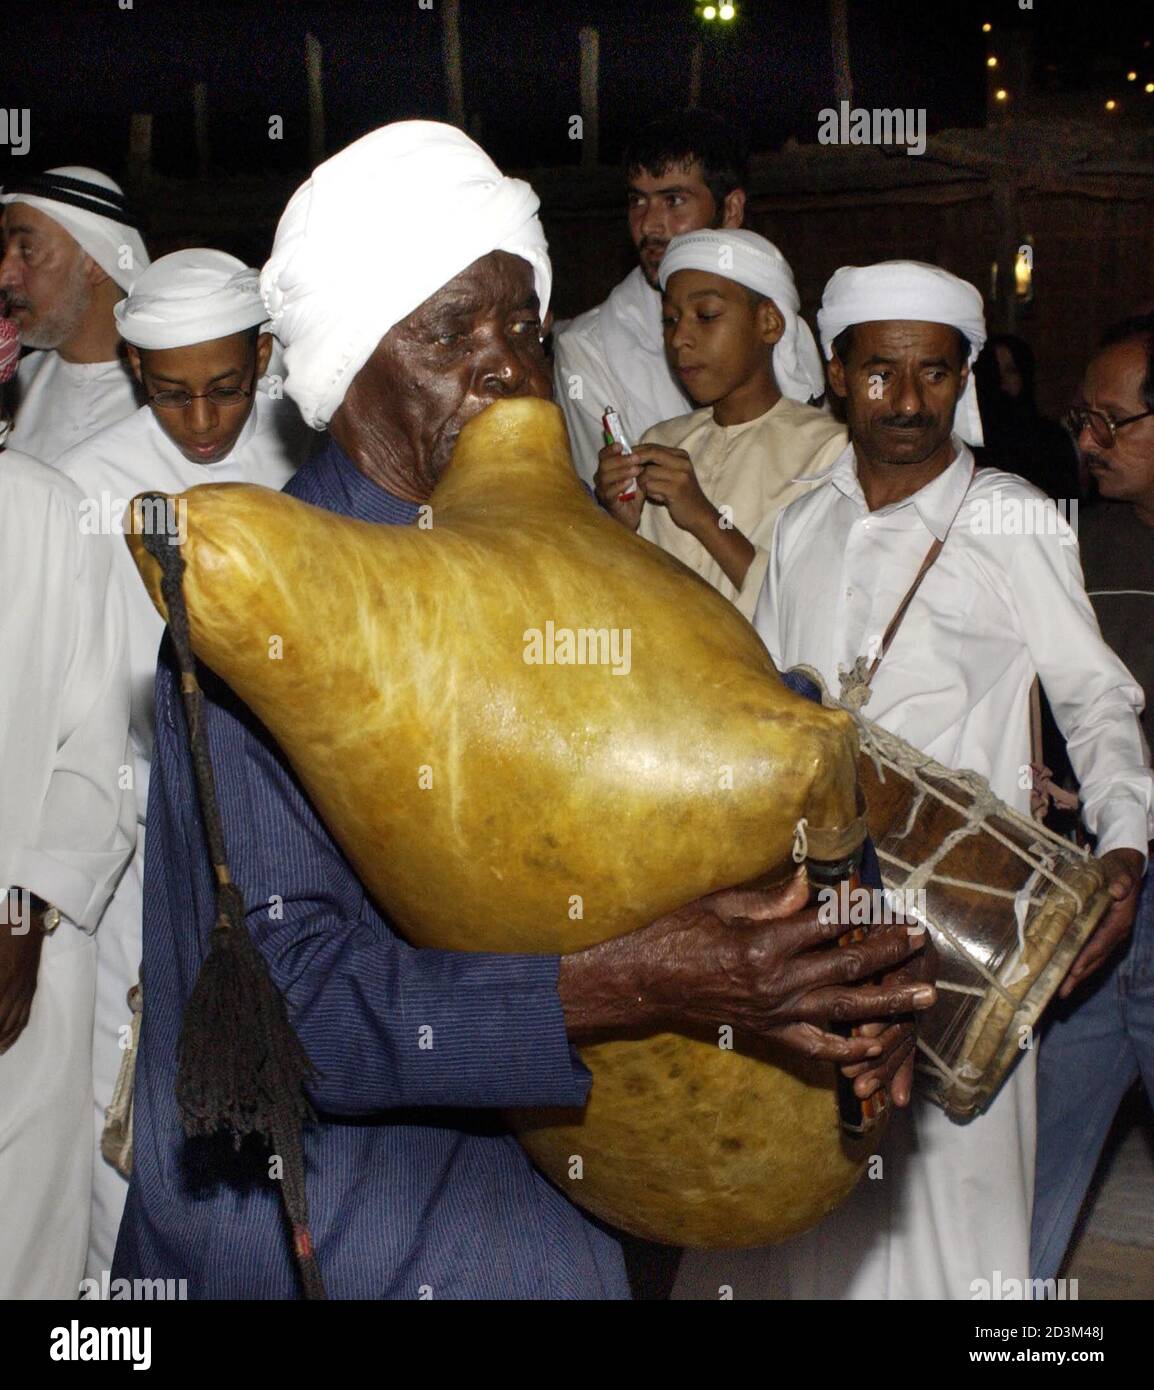 Ibrahim Guloom a member of a traditional musical troupe plays an old piper  instrument made out of goat skin during the Eid Al Fitr celebrations  December 18, 2001. United Arab Emirates celebrate